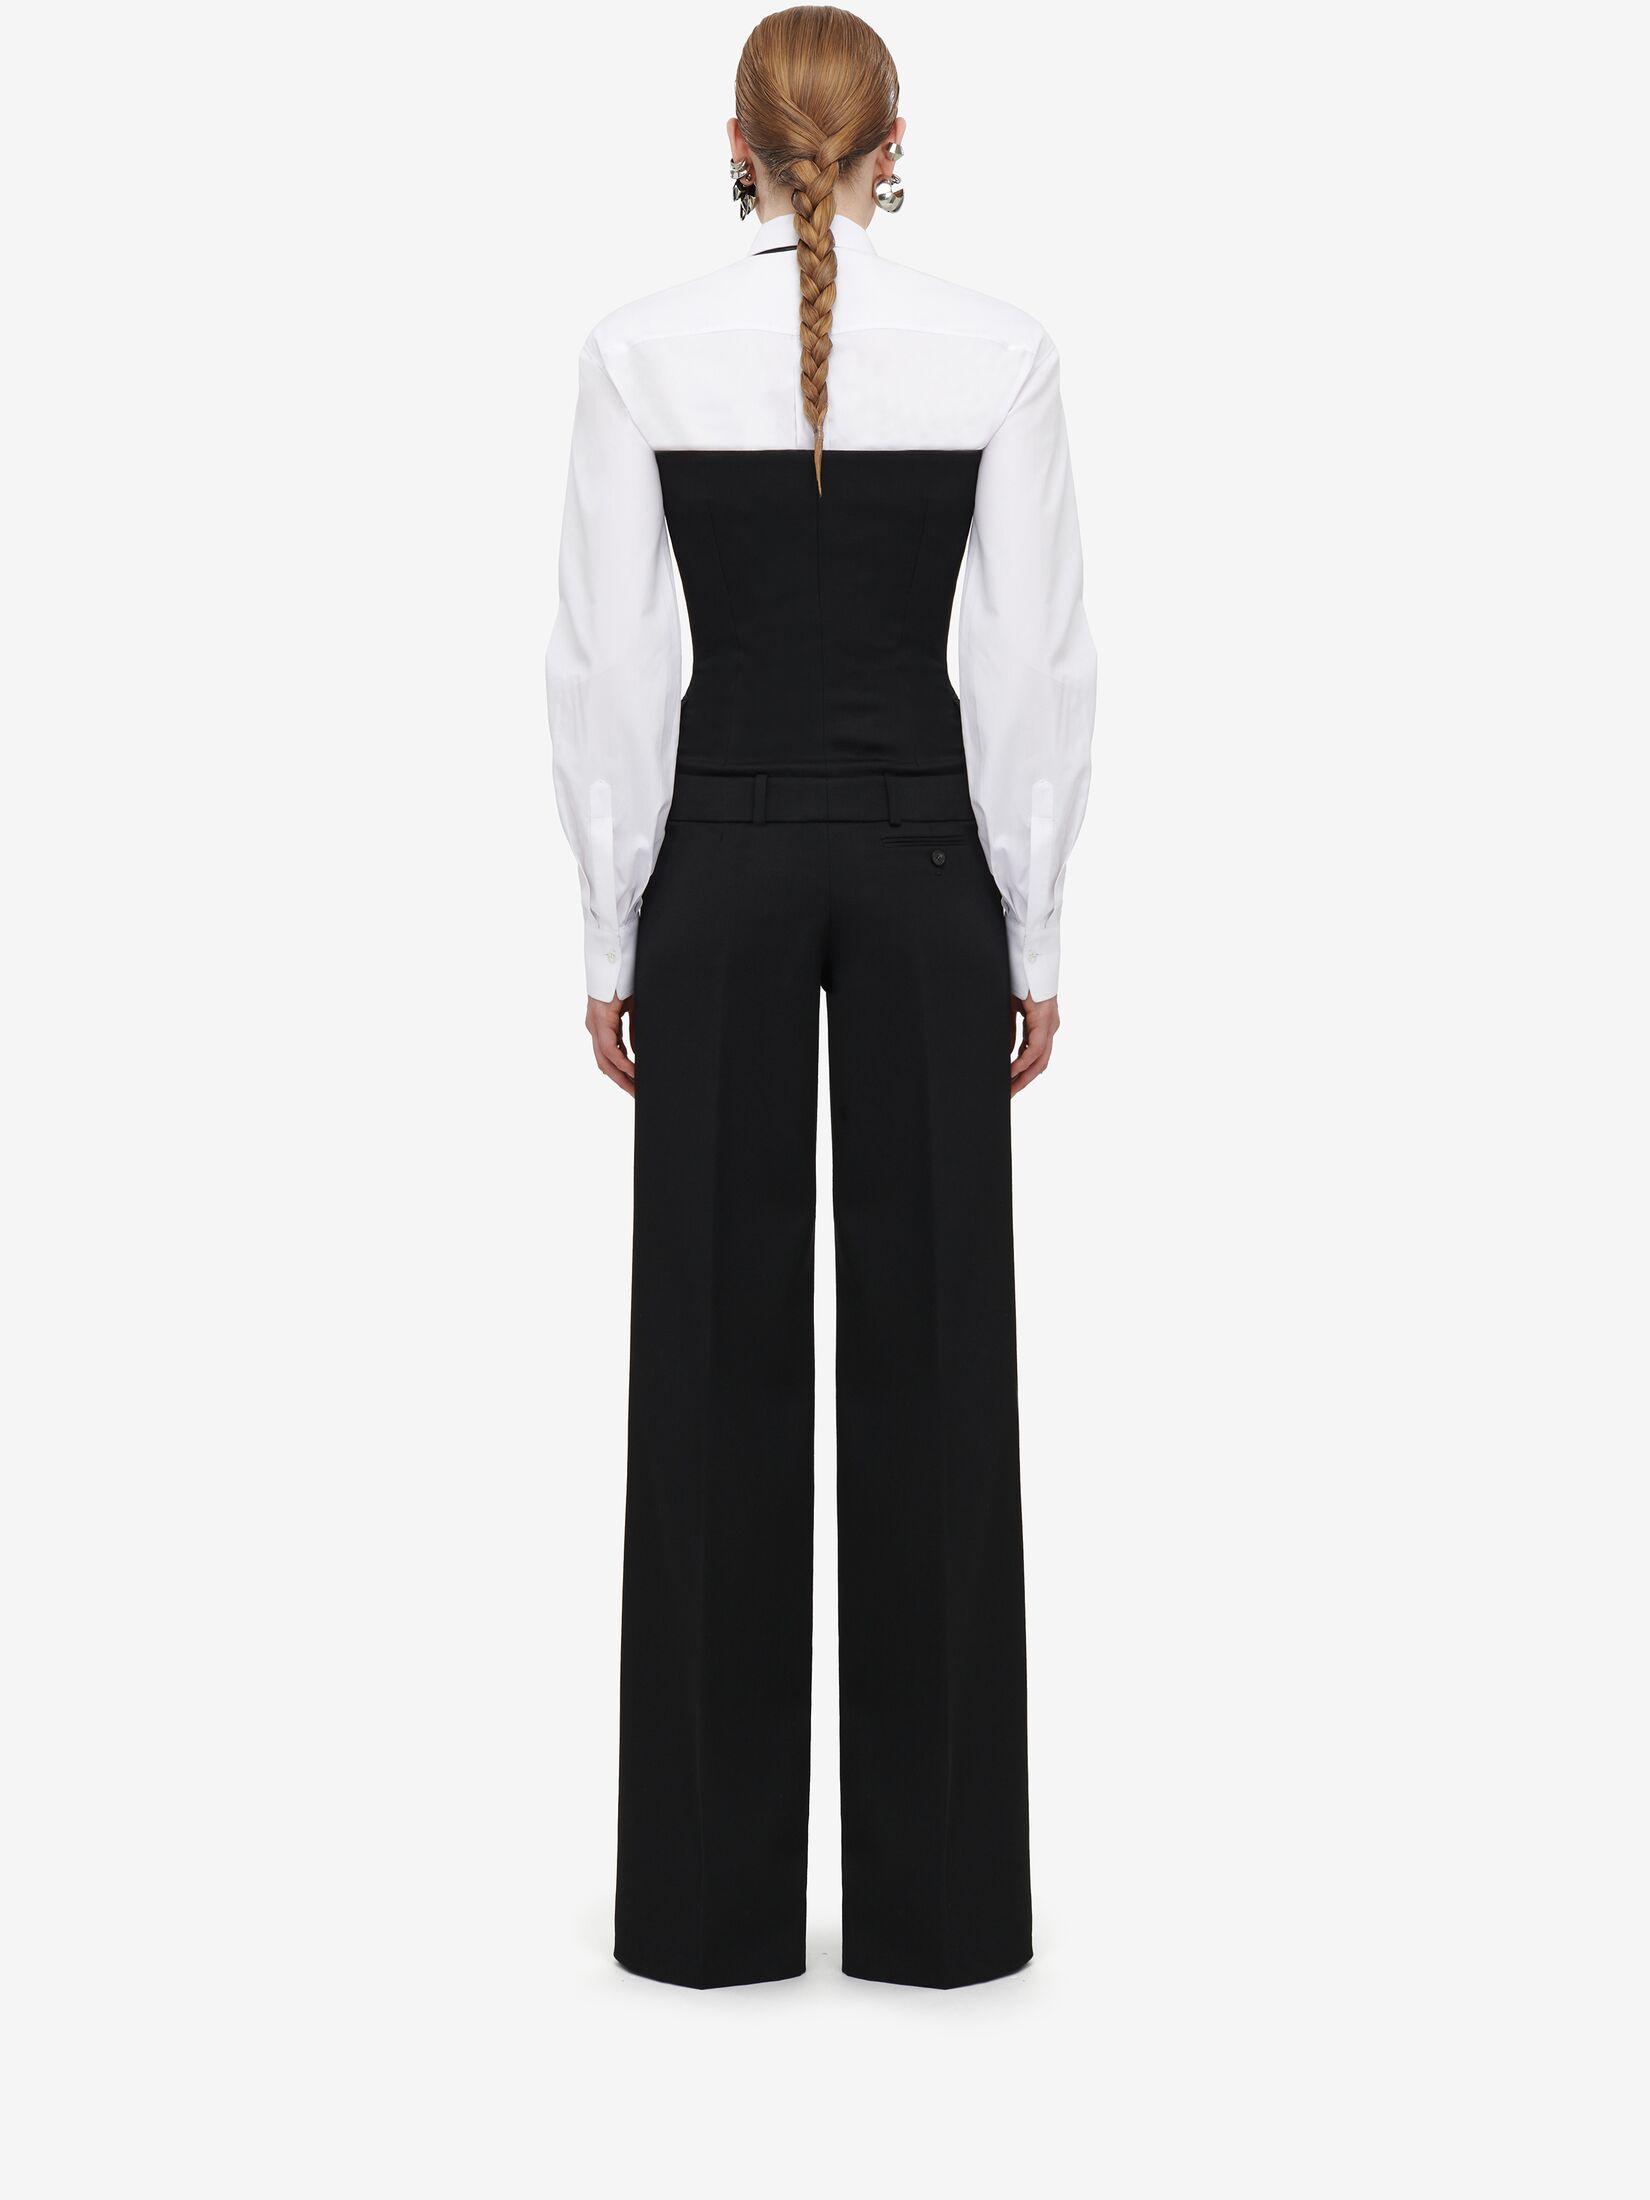 Alexander McQueen Tailored All-in-one in Black | Lyst